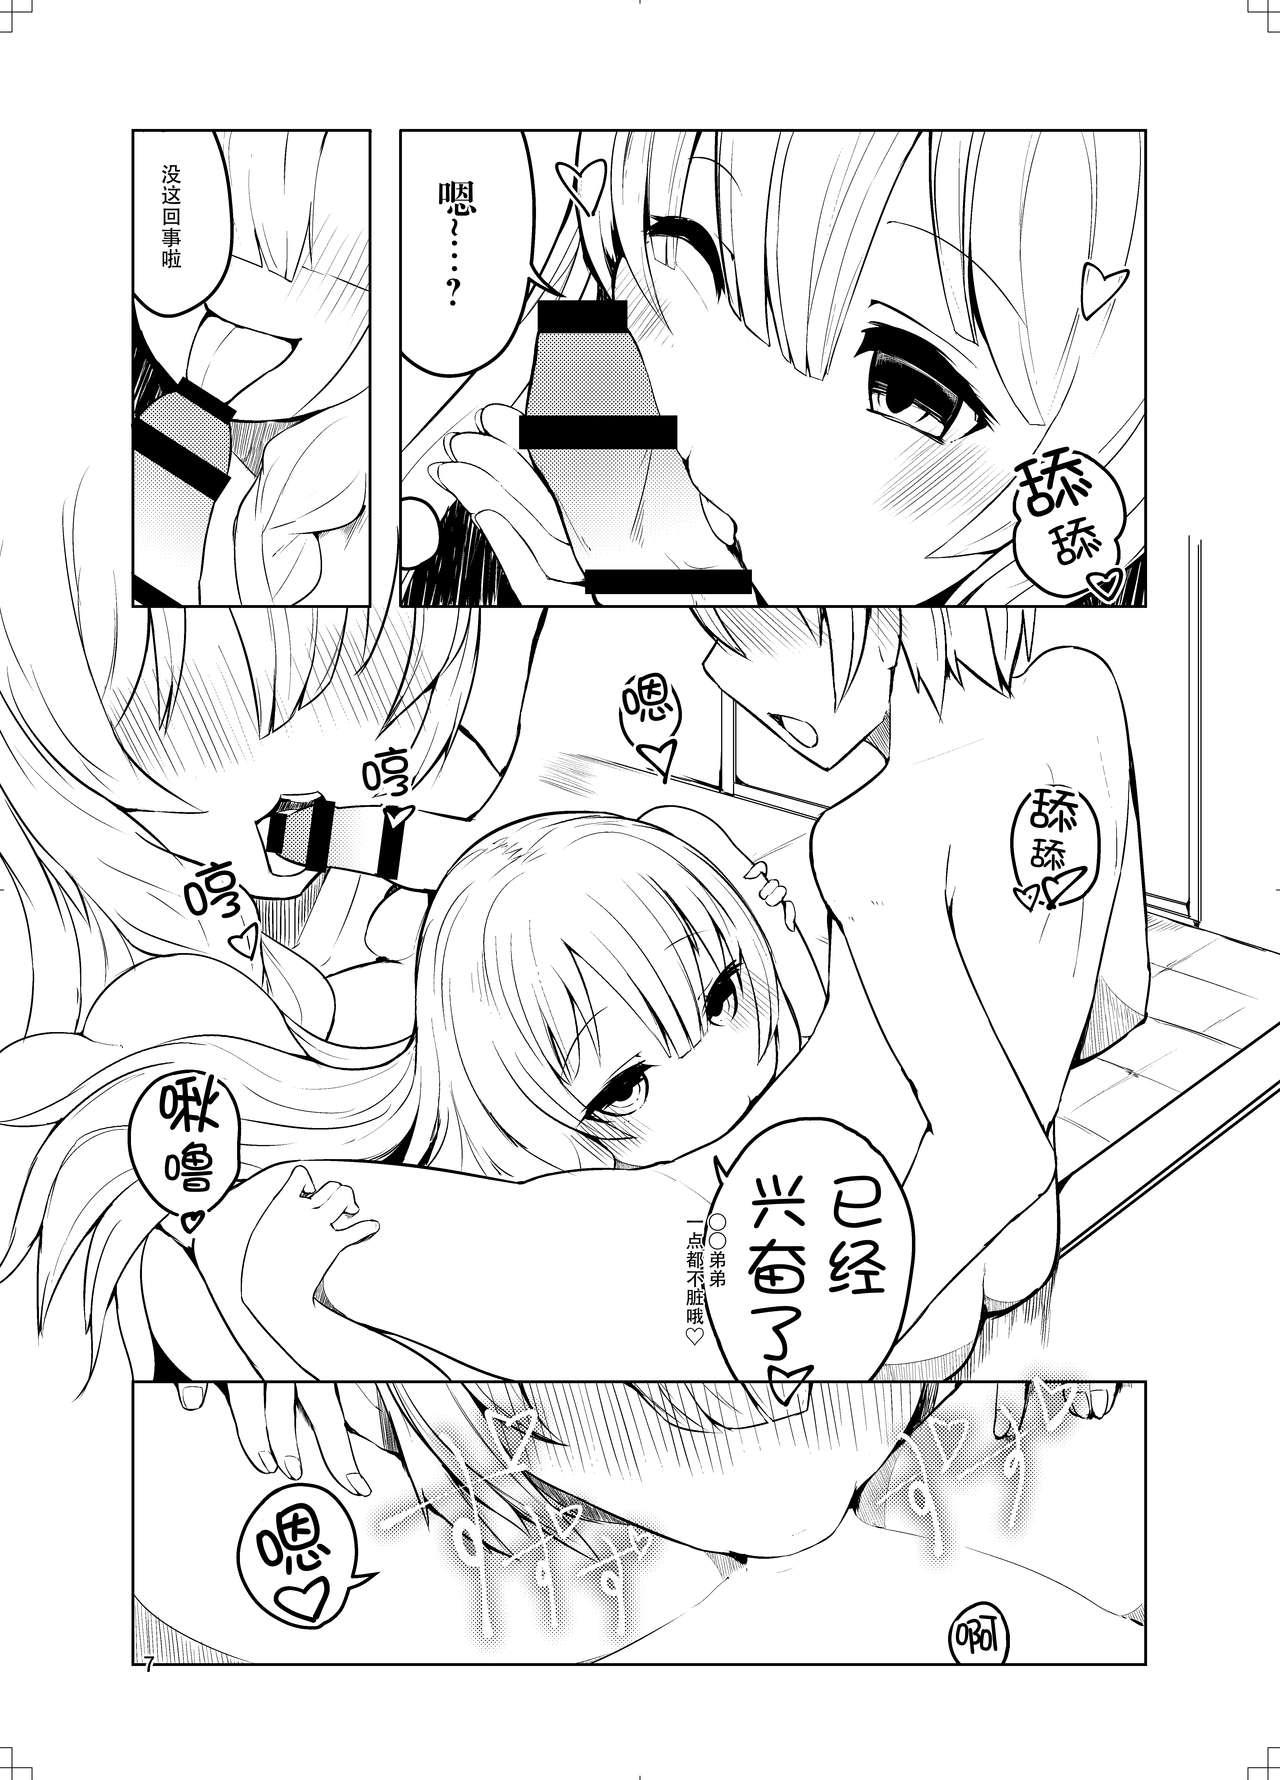 Mommy Onee-san to Ofurox - Original Roleplay - Page 8